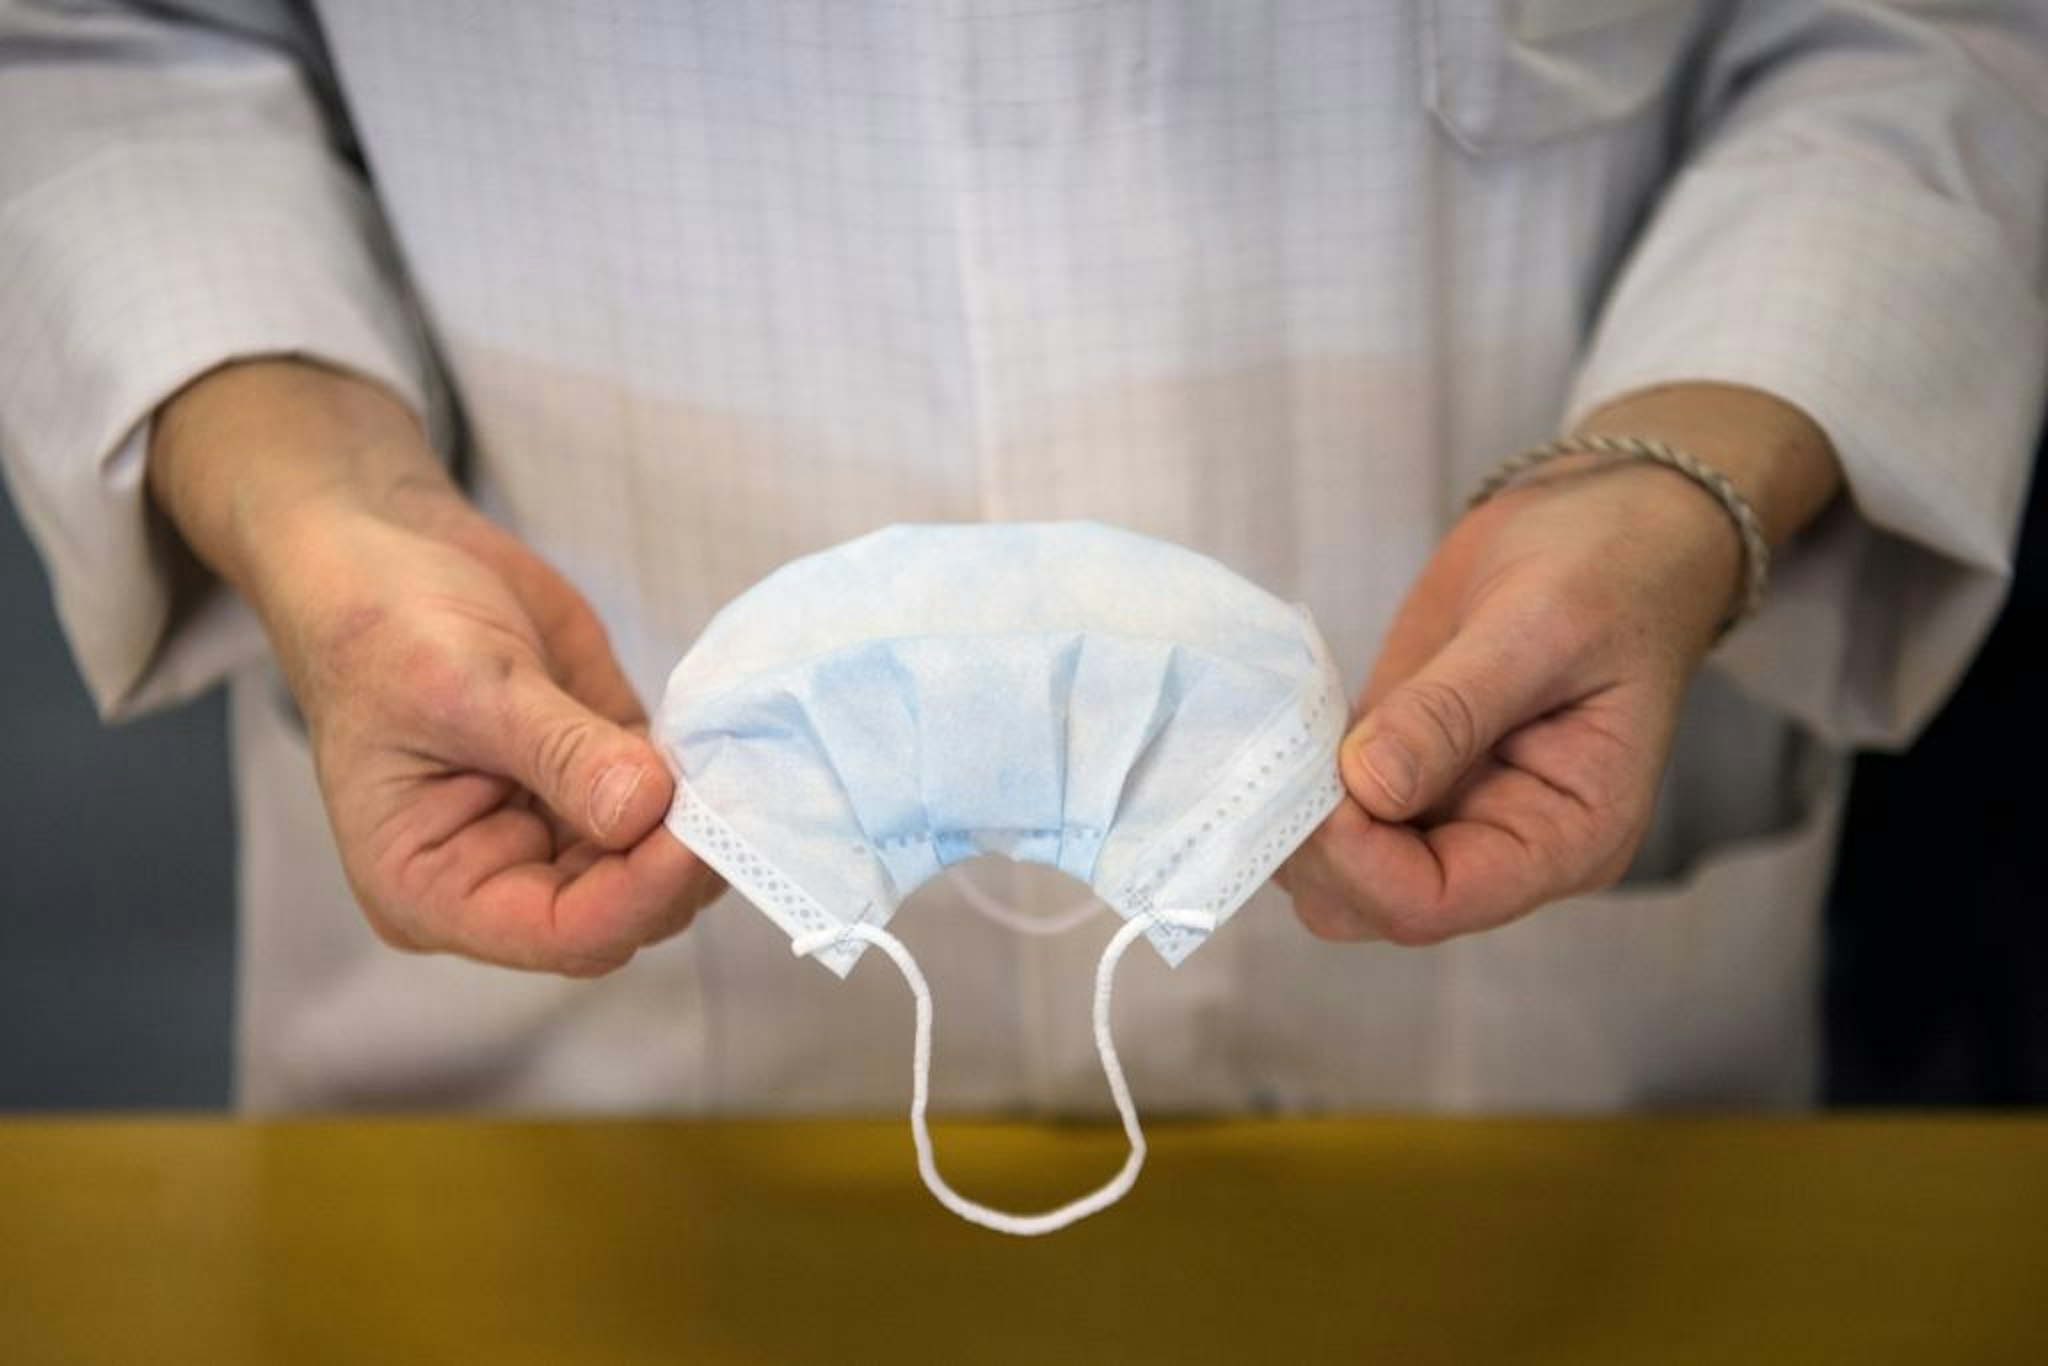 TOPSHOT - An employee controls health protection masks in a production chain of the Kolmi-Hopen company's factory, on February 1, 2020 in Saint-Barthelemy-d'Anjou, western France. - The company indicated receiving hundreds of millions of orders for health protection masks due to cases of coronavirus that emerged in a market in the central Chinese city of Wuhan. The coronavirus outbreak has so far killed more than 250 people and infected thousands in mainland China and beyond and has forced governments around the world to take drastic measures. (Photo by Loic VENANCE / AFP) (Photo by LOIC VENANCE/AFP via Getty Images)